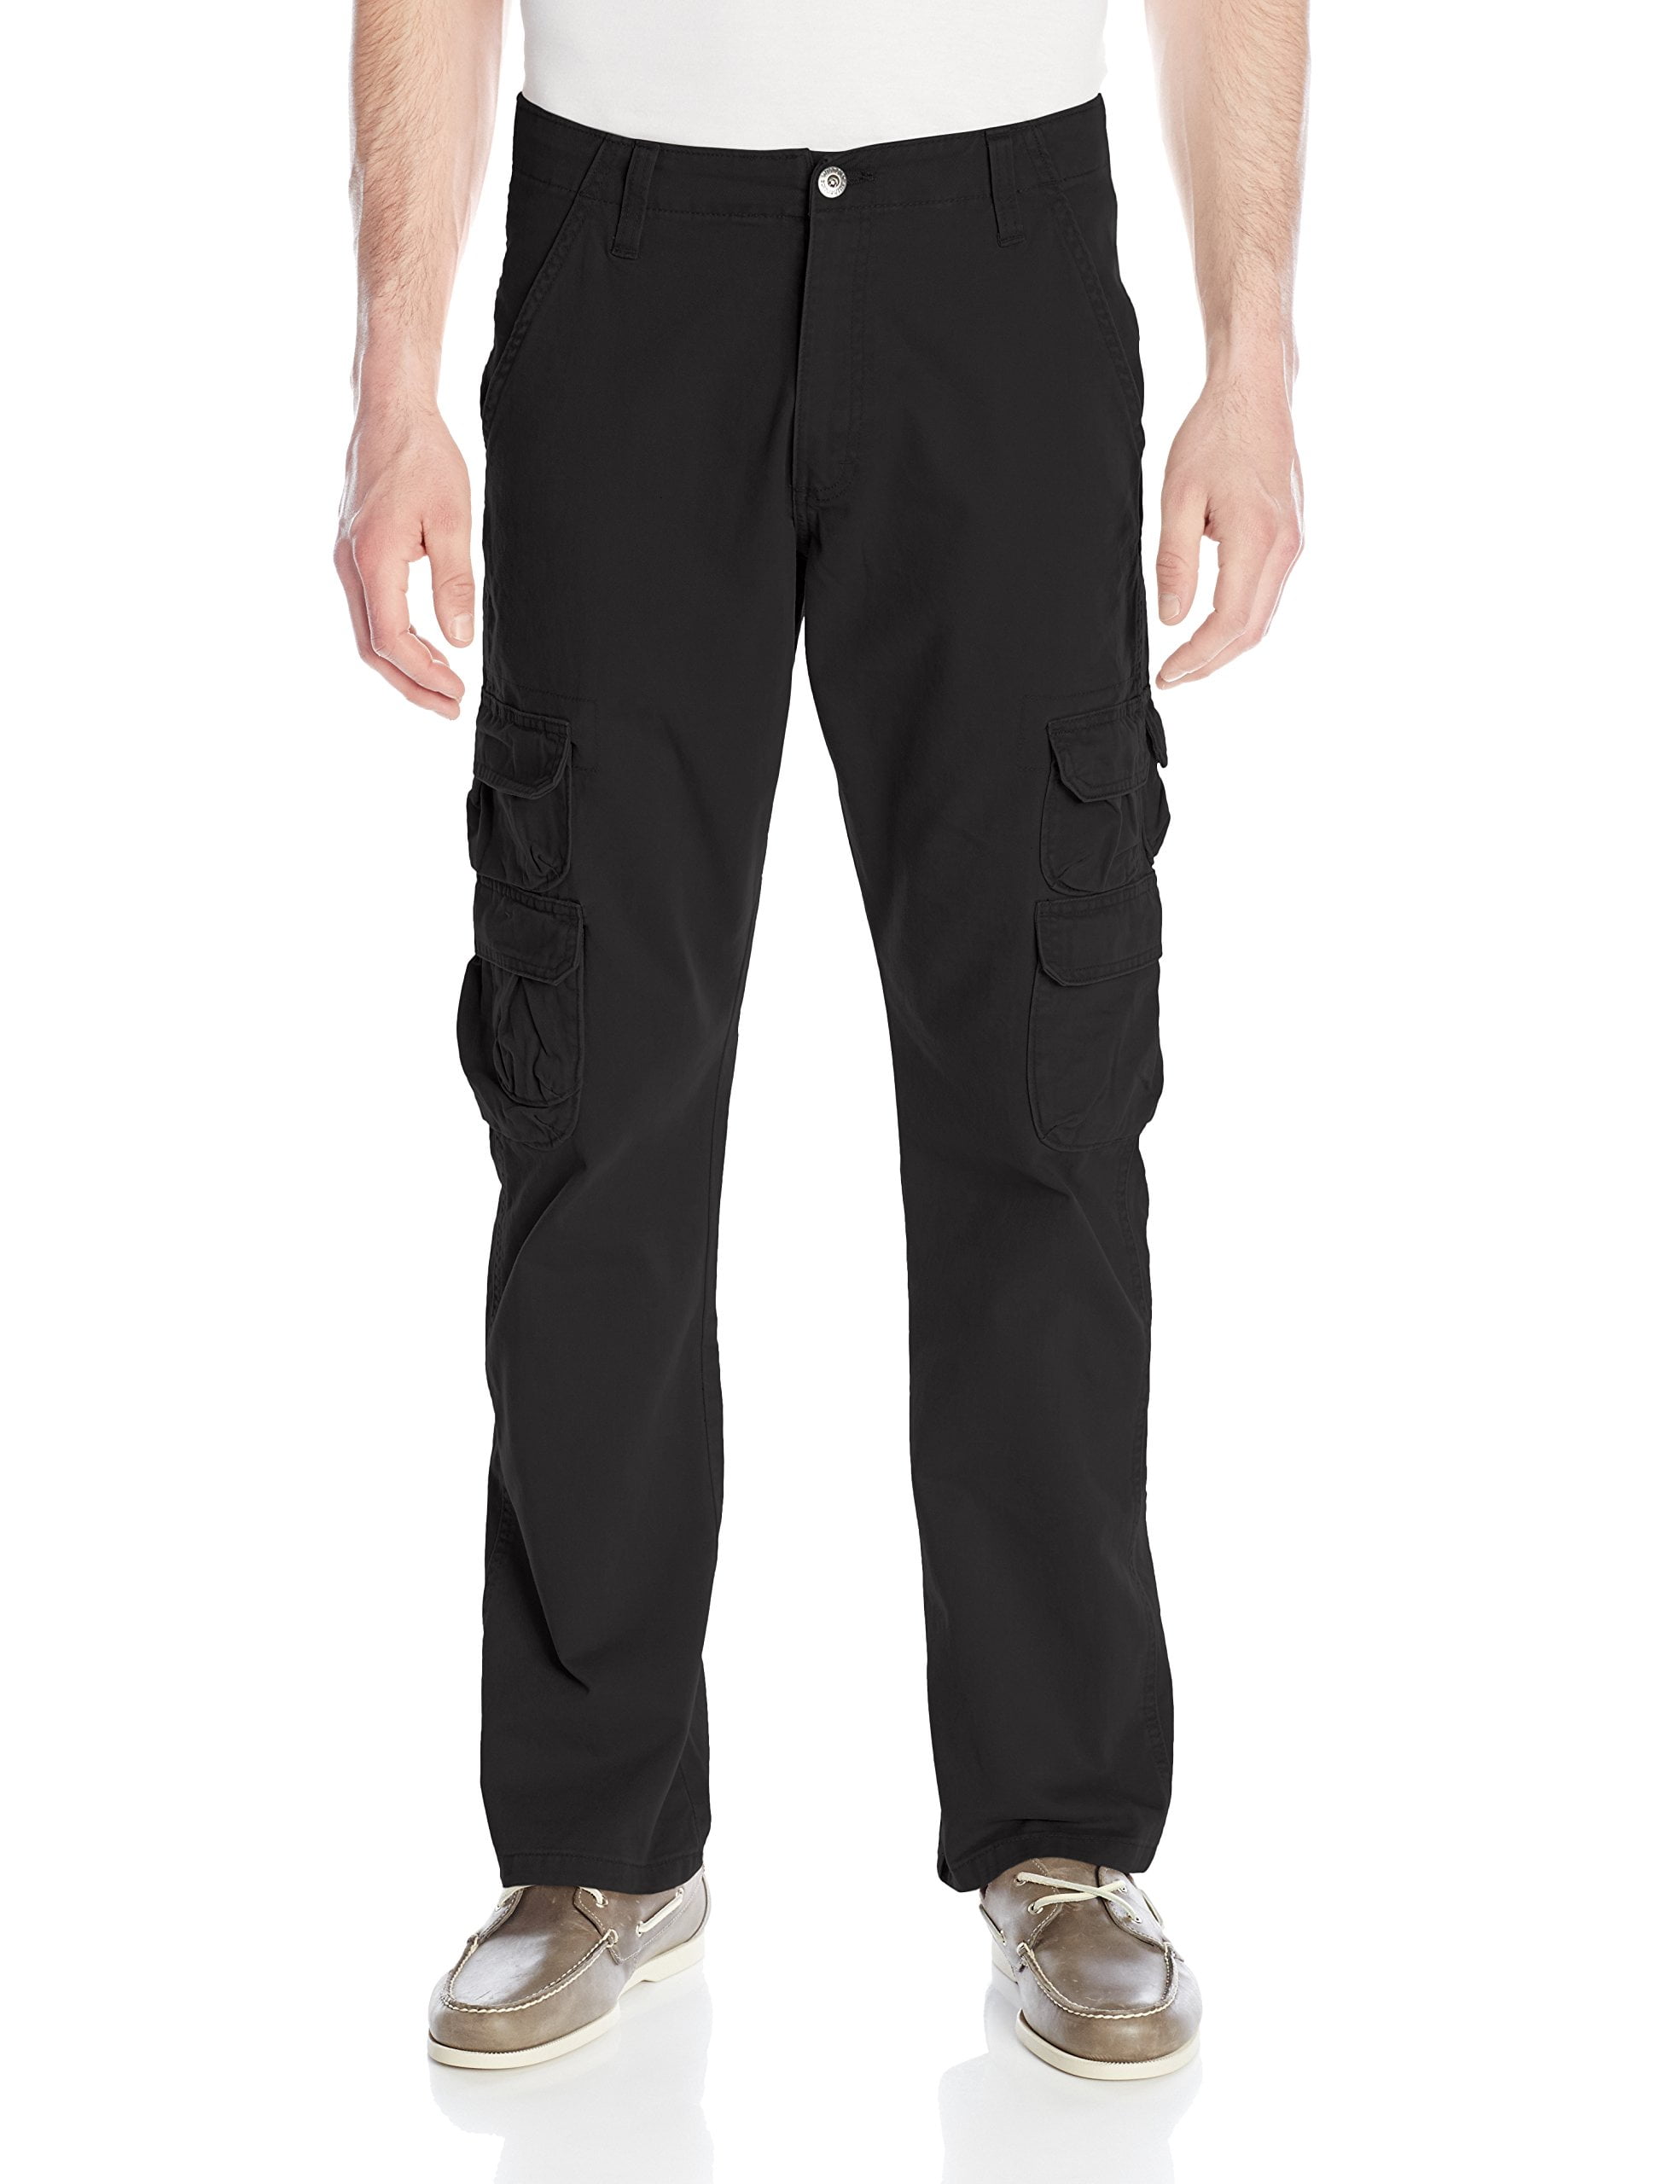 Anlee Mens Winter Fleece Lined Relaxed Drawstring Cargo Pants